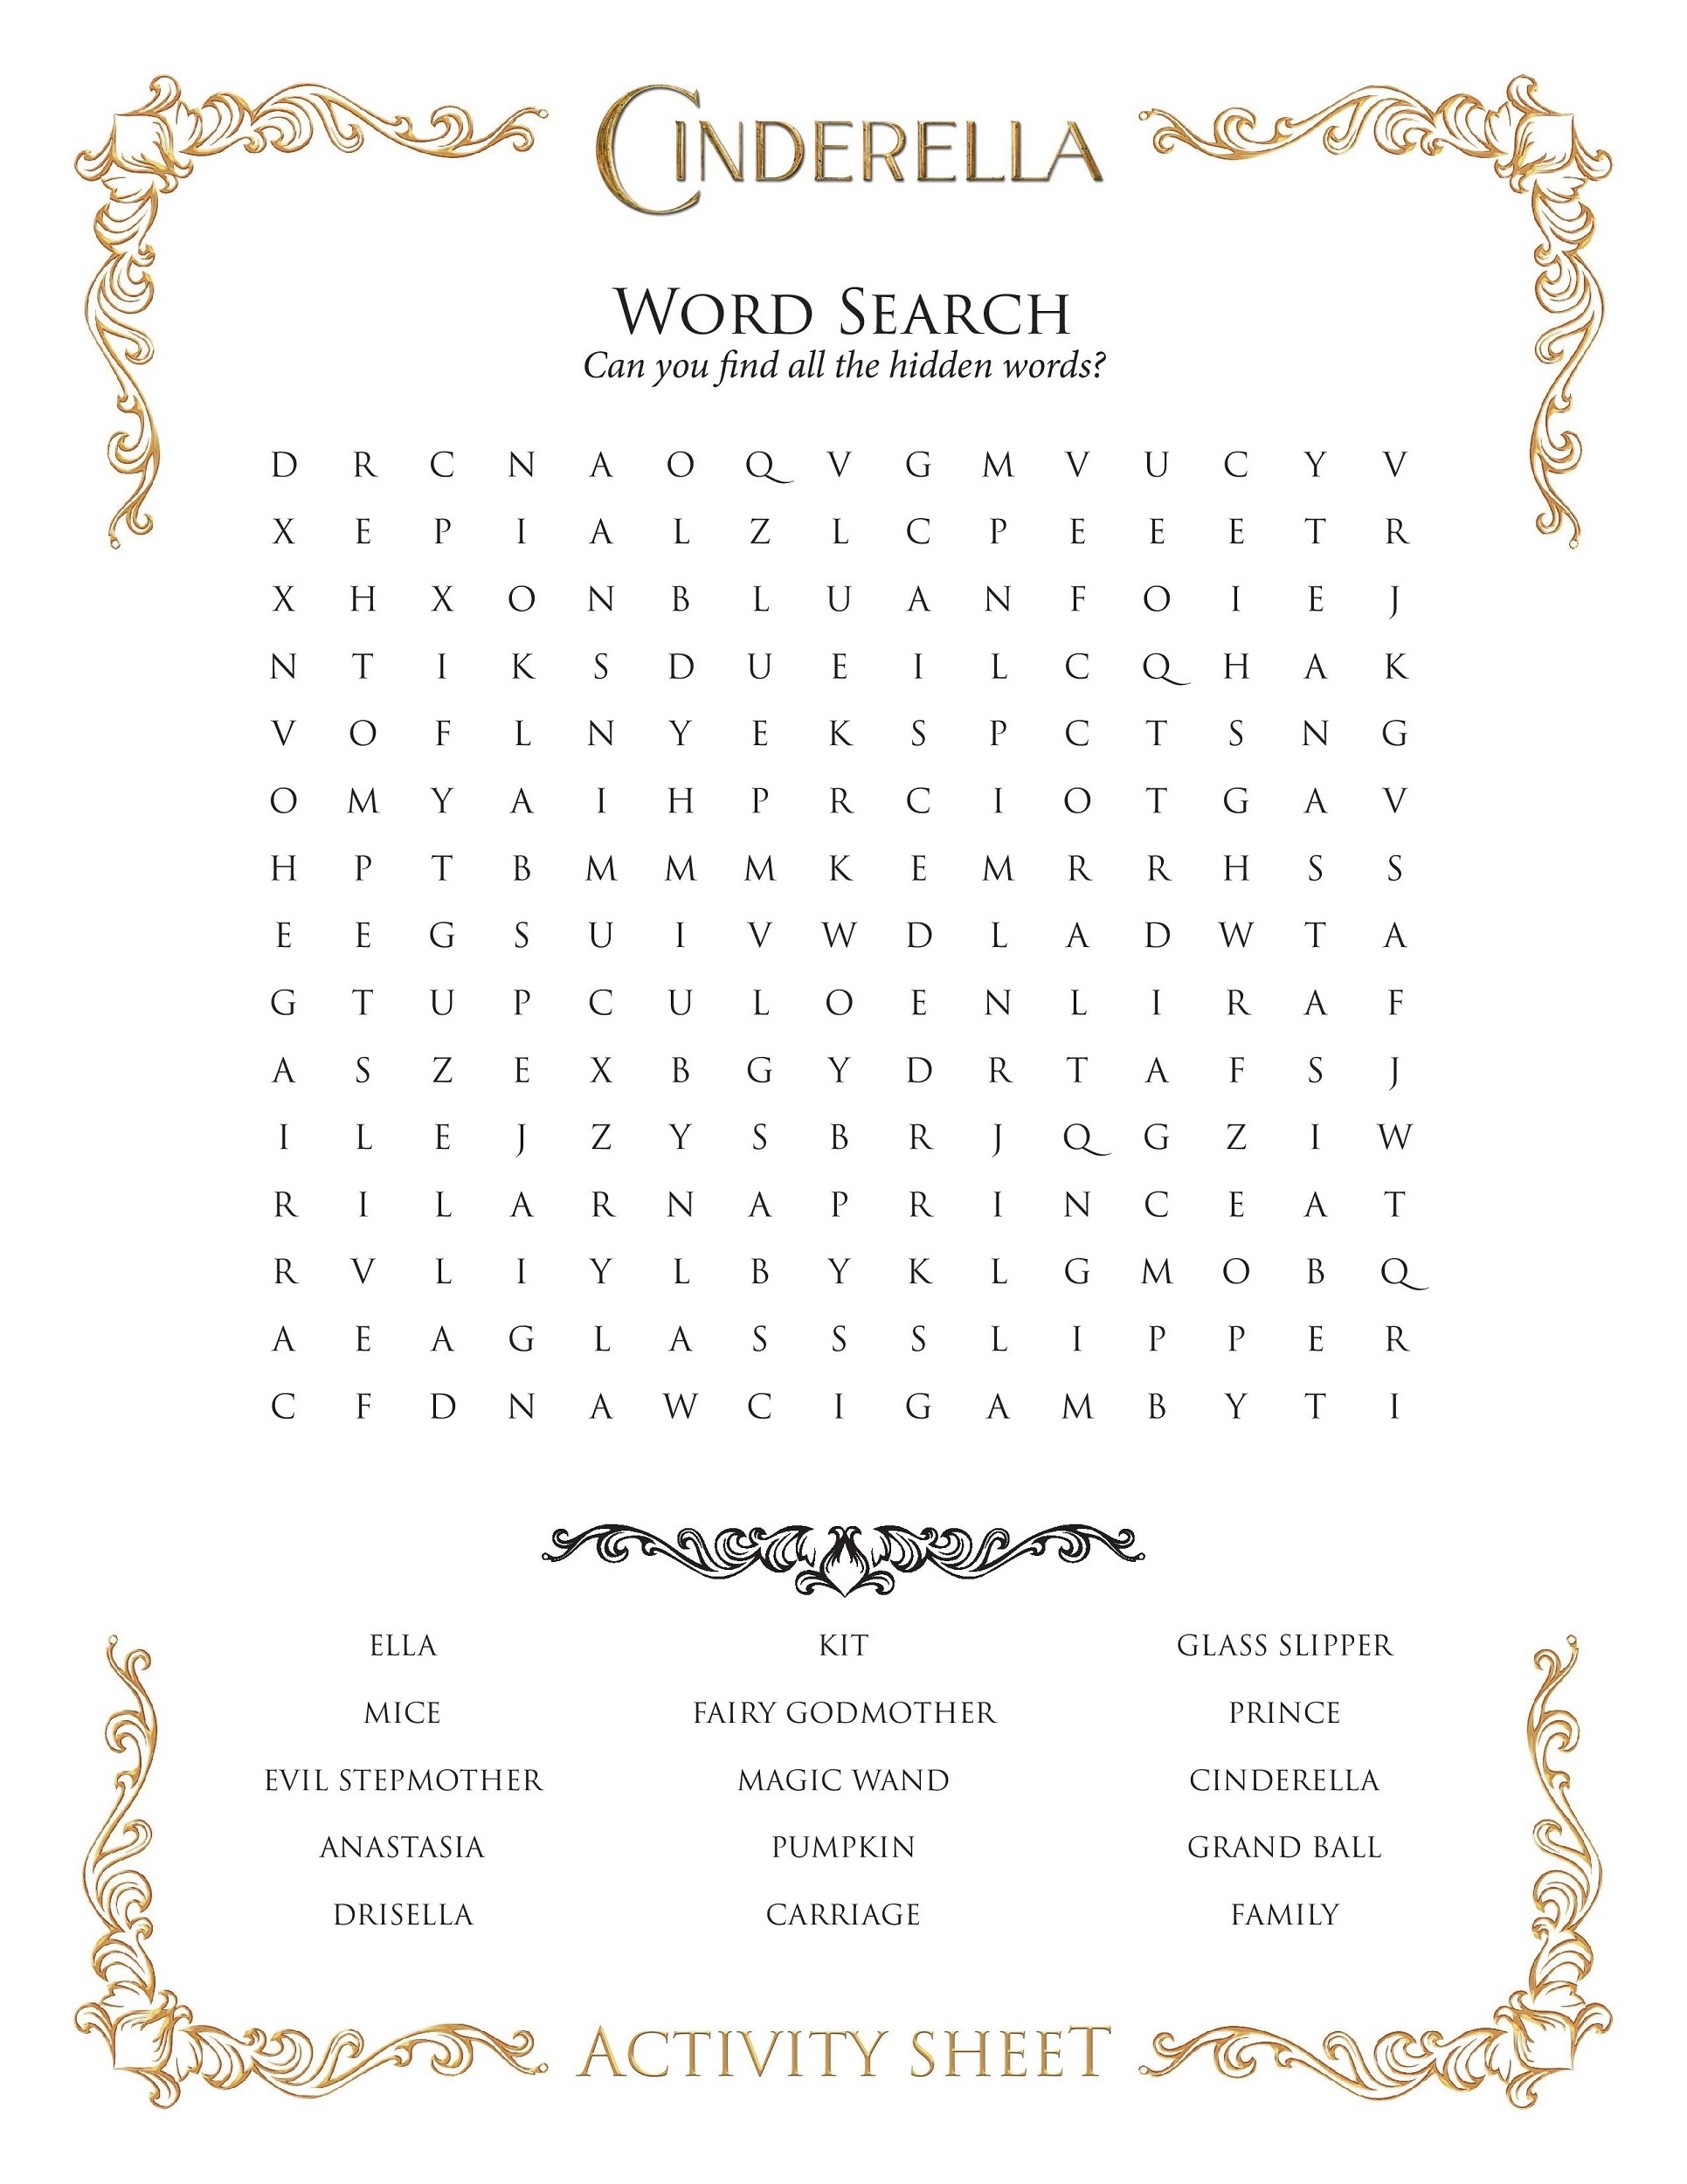 15 Free Disney Word Searches | Kittybabylove in Disney Princess Word Search Printable